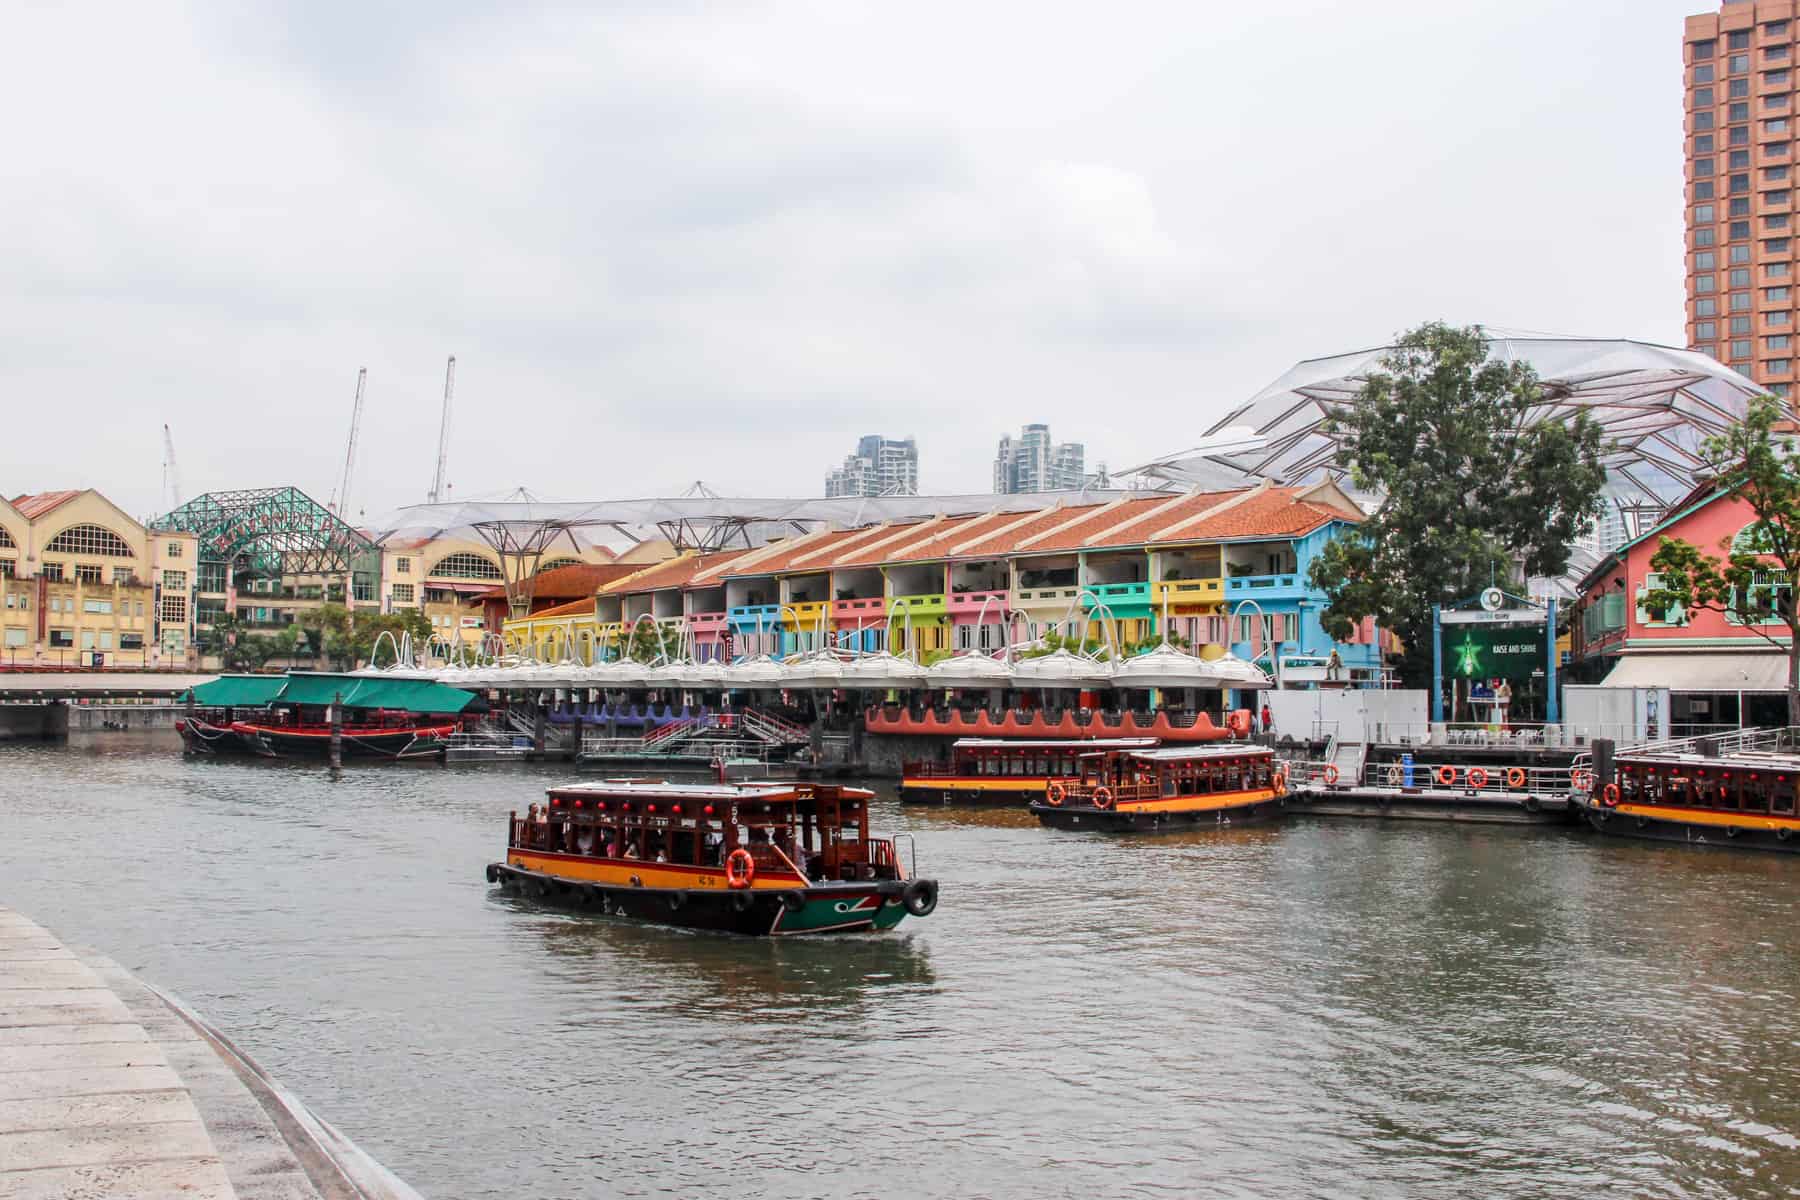 An orange boat passes the multicoloured rainbow row of waterside buildings in Singapore's Clarke Quay